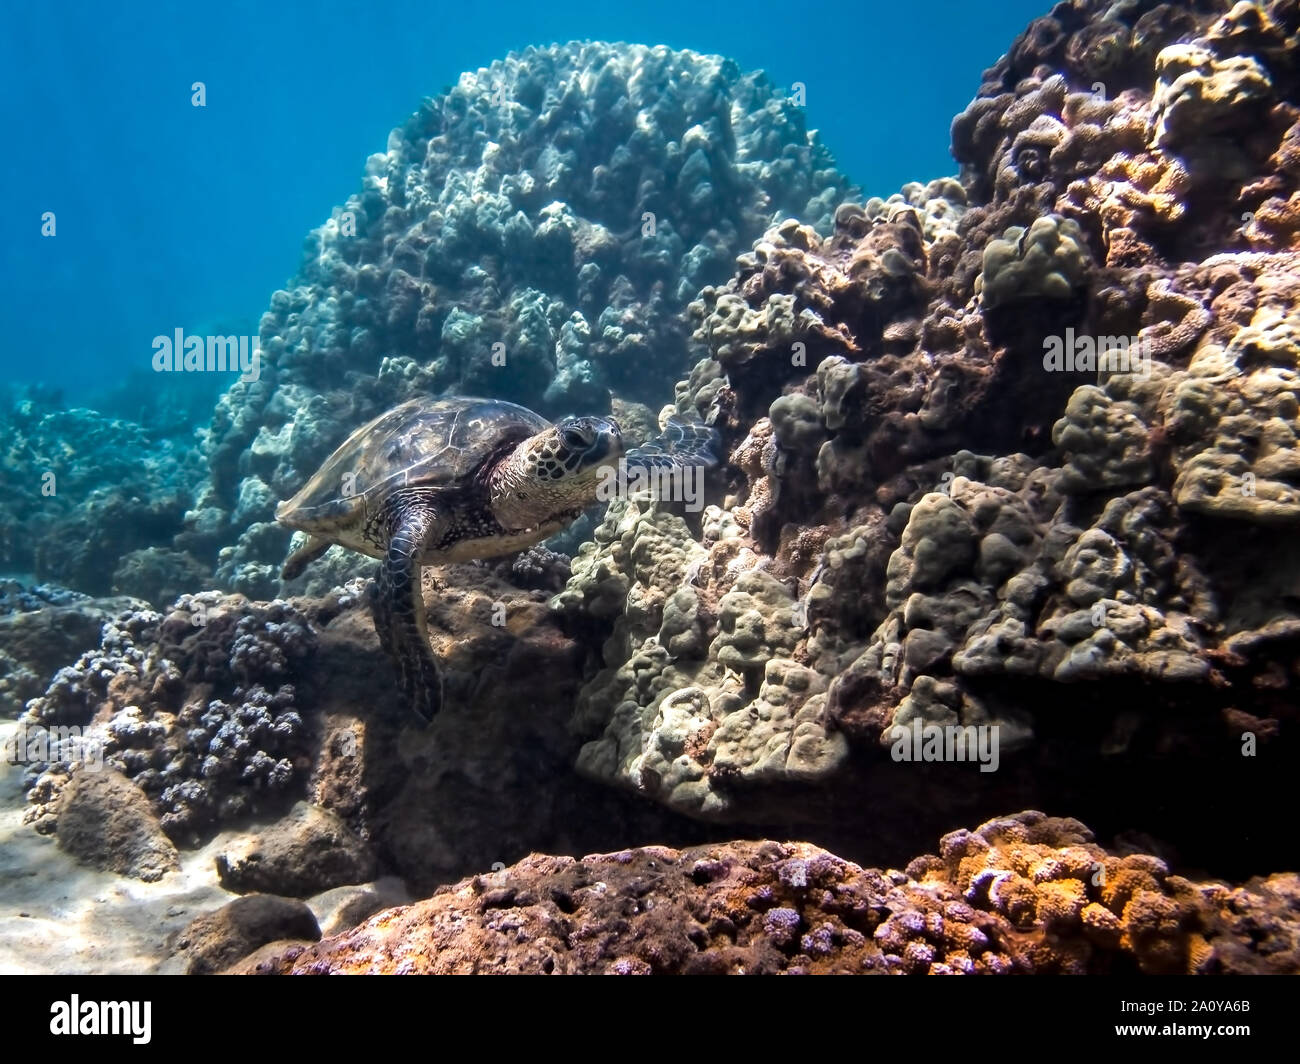 Green sea turtle swims along coral landscape underwater in Hawaii. Stock Photo